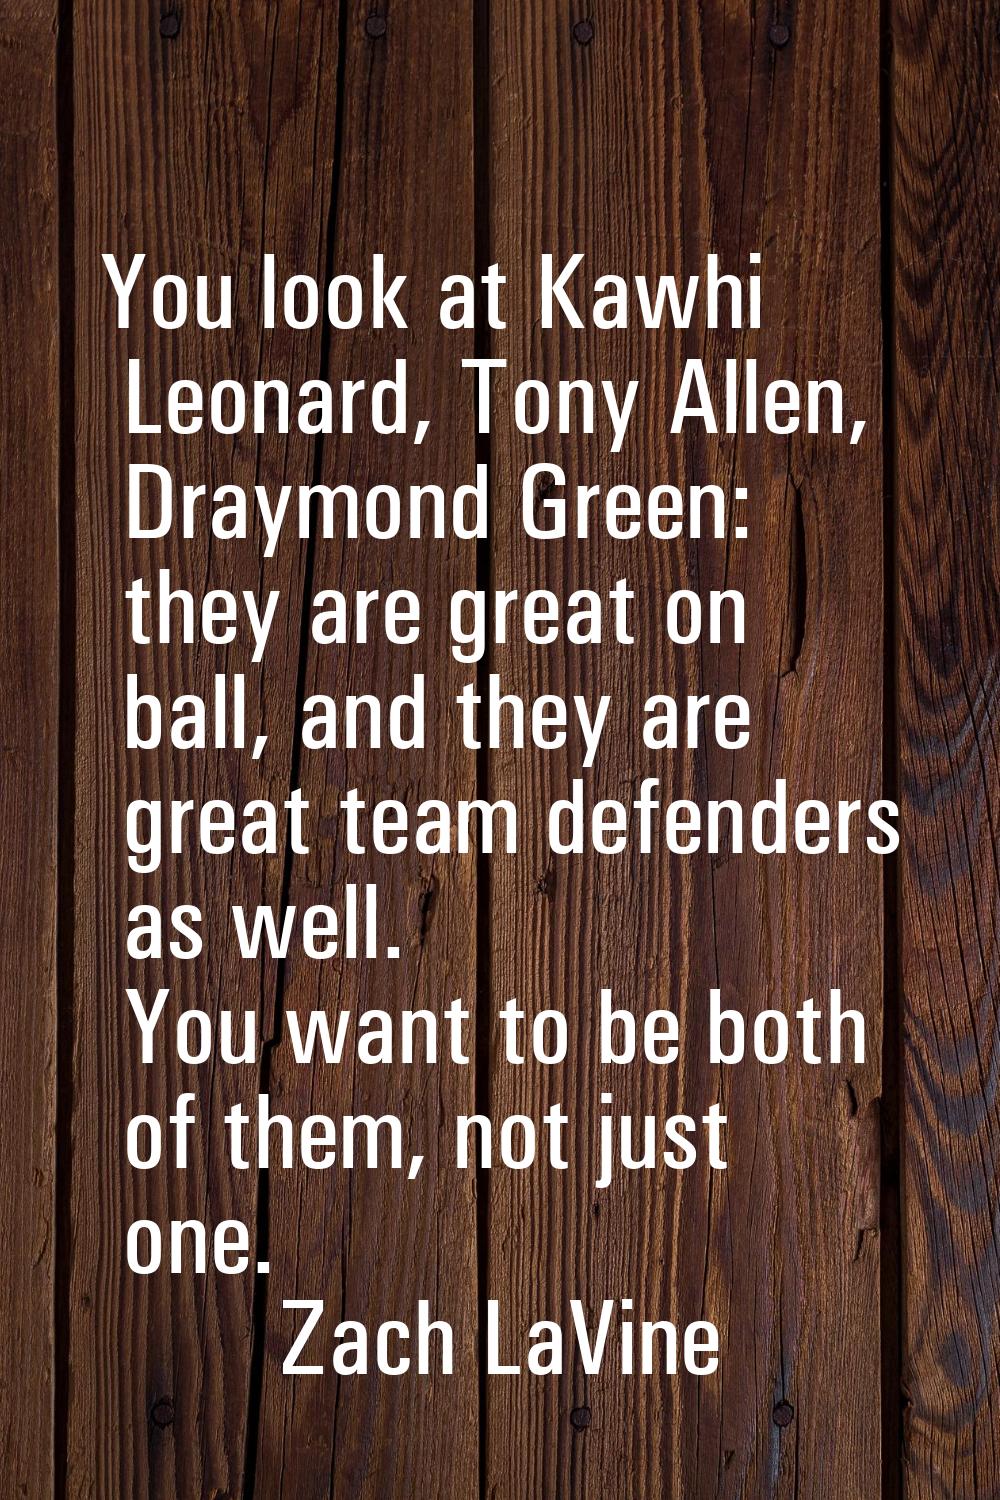 You look at Kawhi Leonard, Tony Allen, Draymond Green: they are great on ball, and they are great t